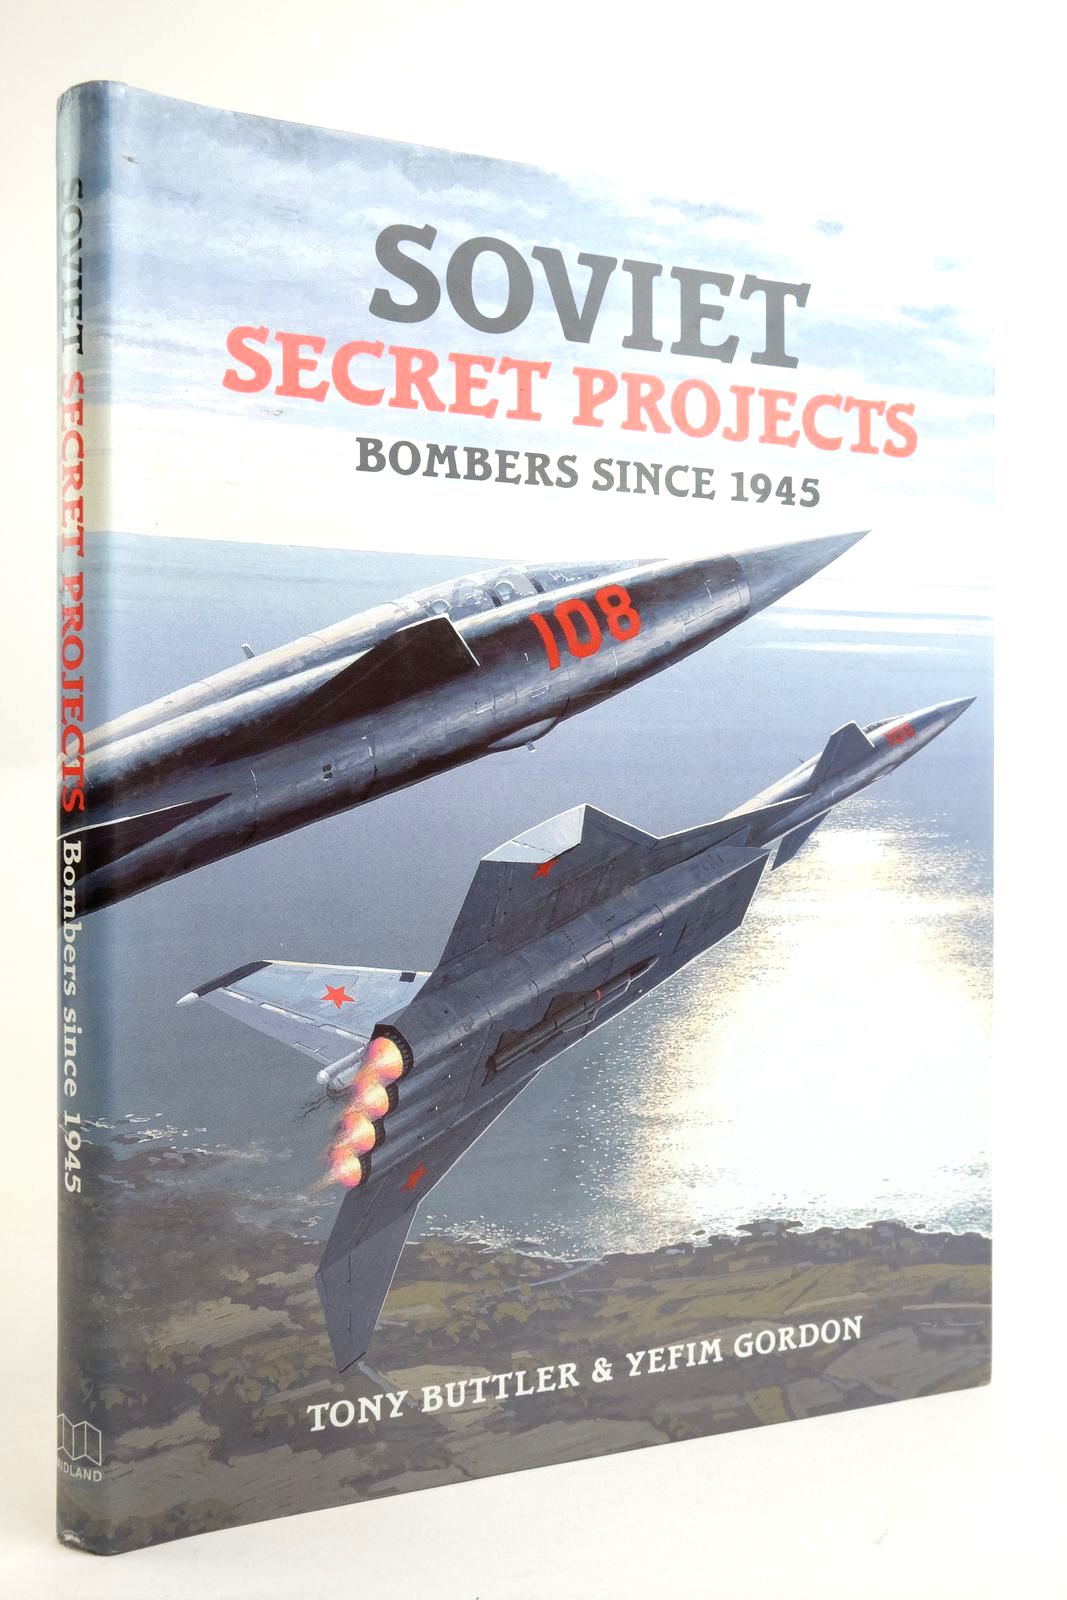 Photo of SOVIET SECRET PROJECTS: BOMBERS SINCE 1945 written by Buttler, Tony
Gordon, Yefim published by Midland (STOCK CODE: 2136219)  for sale by Stella & Rose's Books